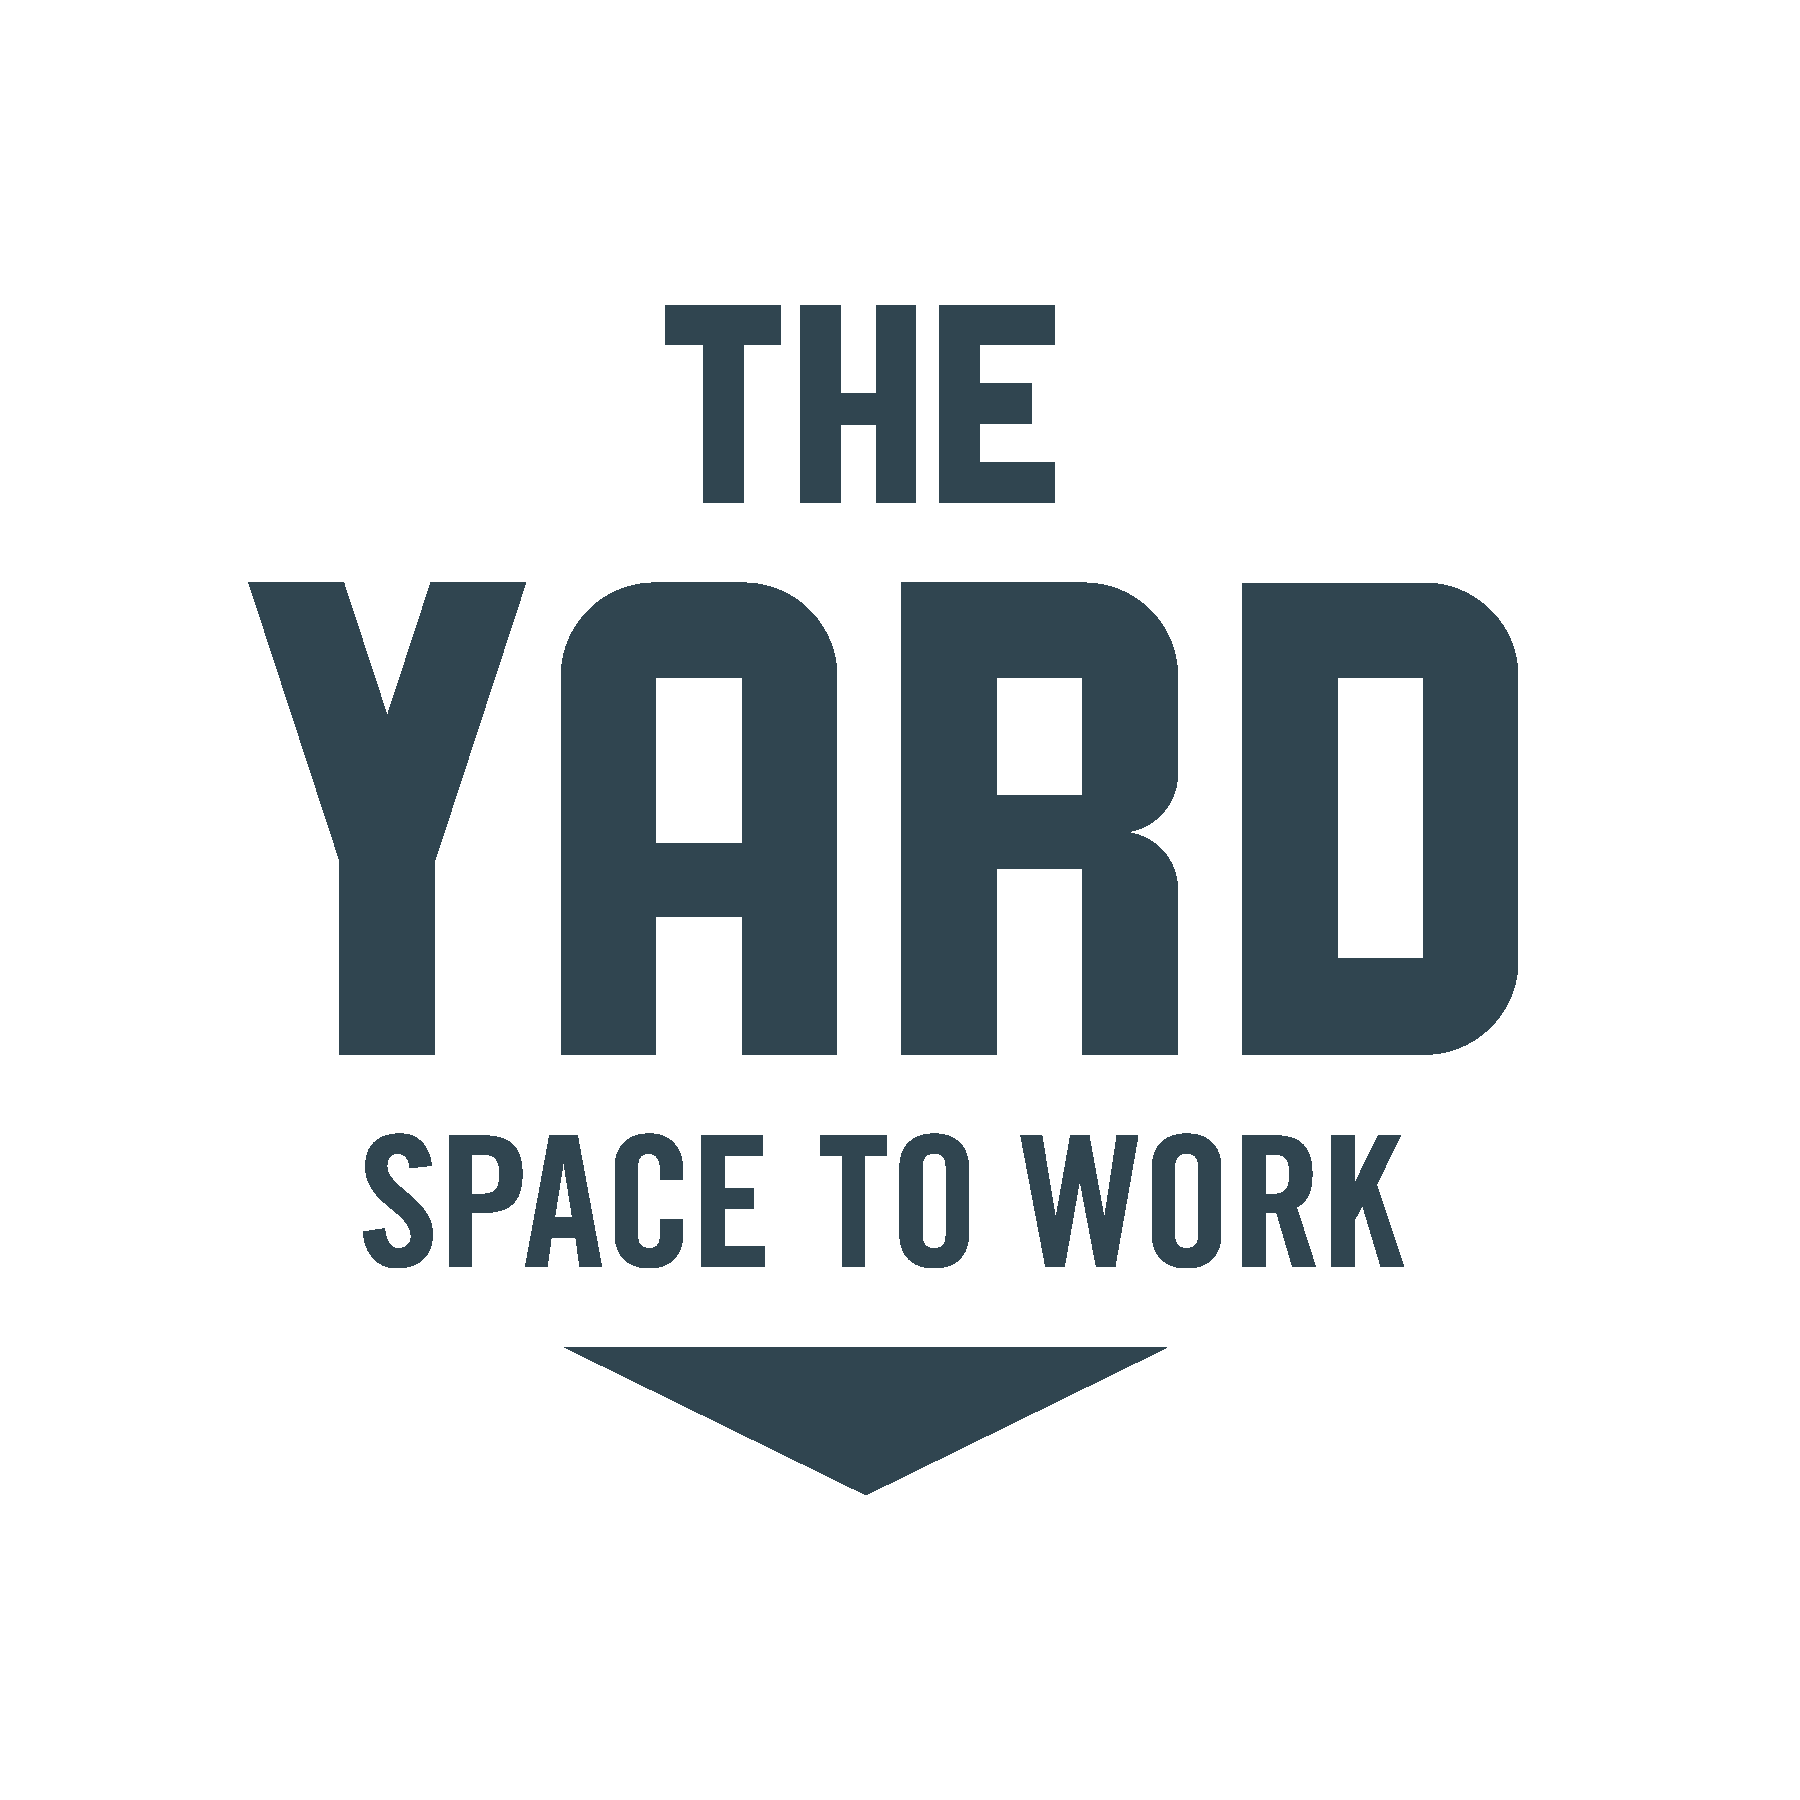 Yard Logo - NYC Coworking Space Pass $ Work Space, Office Space :The Yard